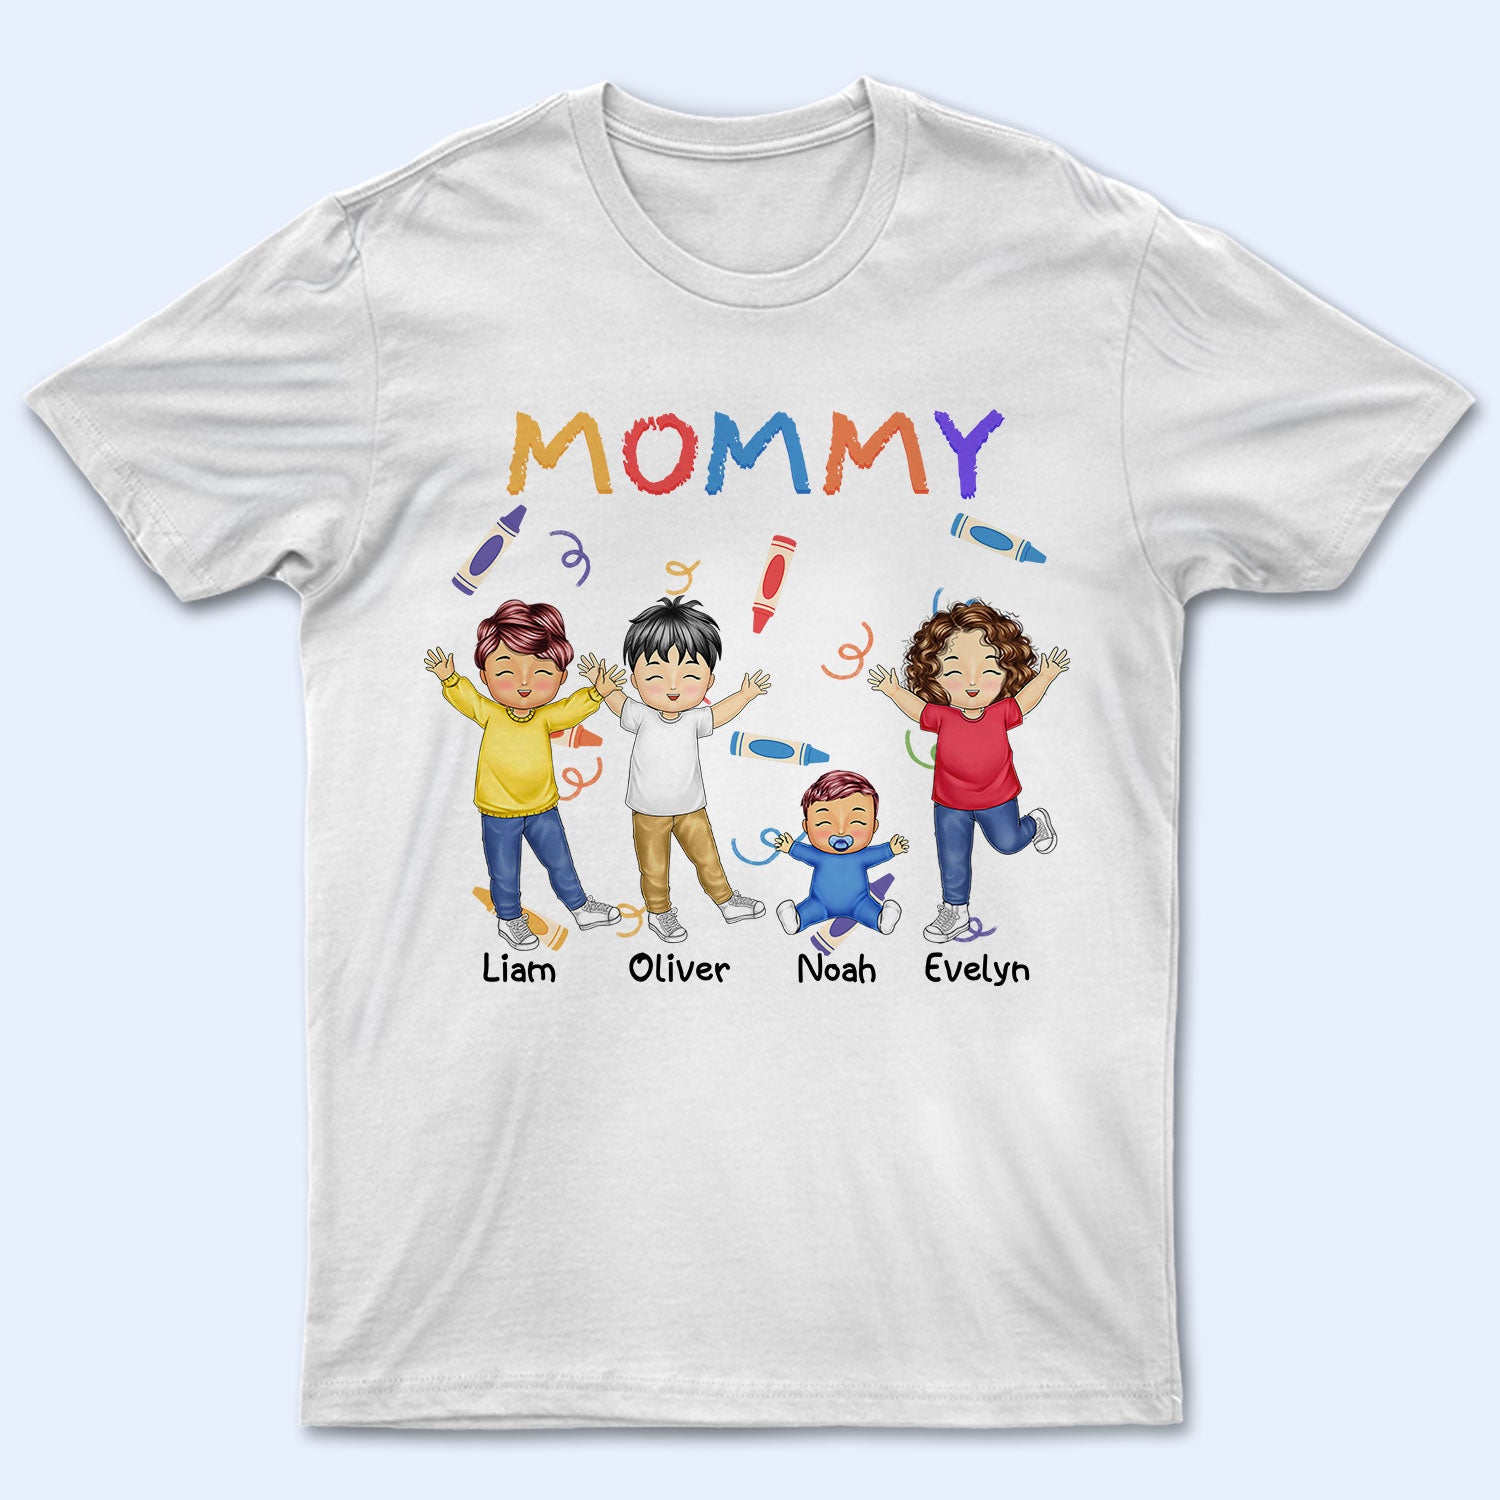 Nana Papa Mommy Daddy - Birthday, Loving Gift For Mother, Father, Grandma, Grandpa - Personalized T Shirt